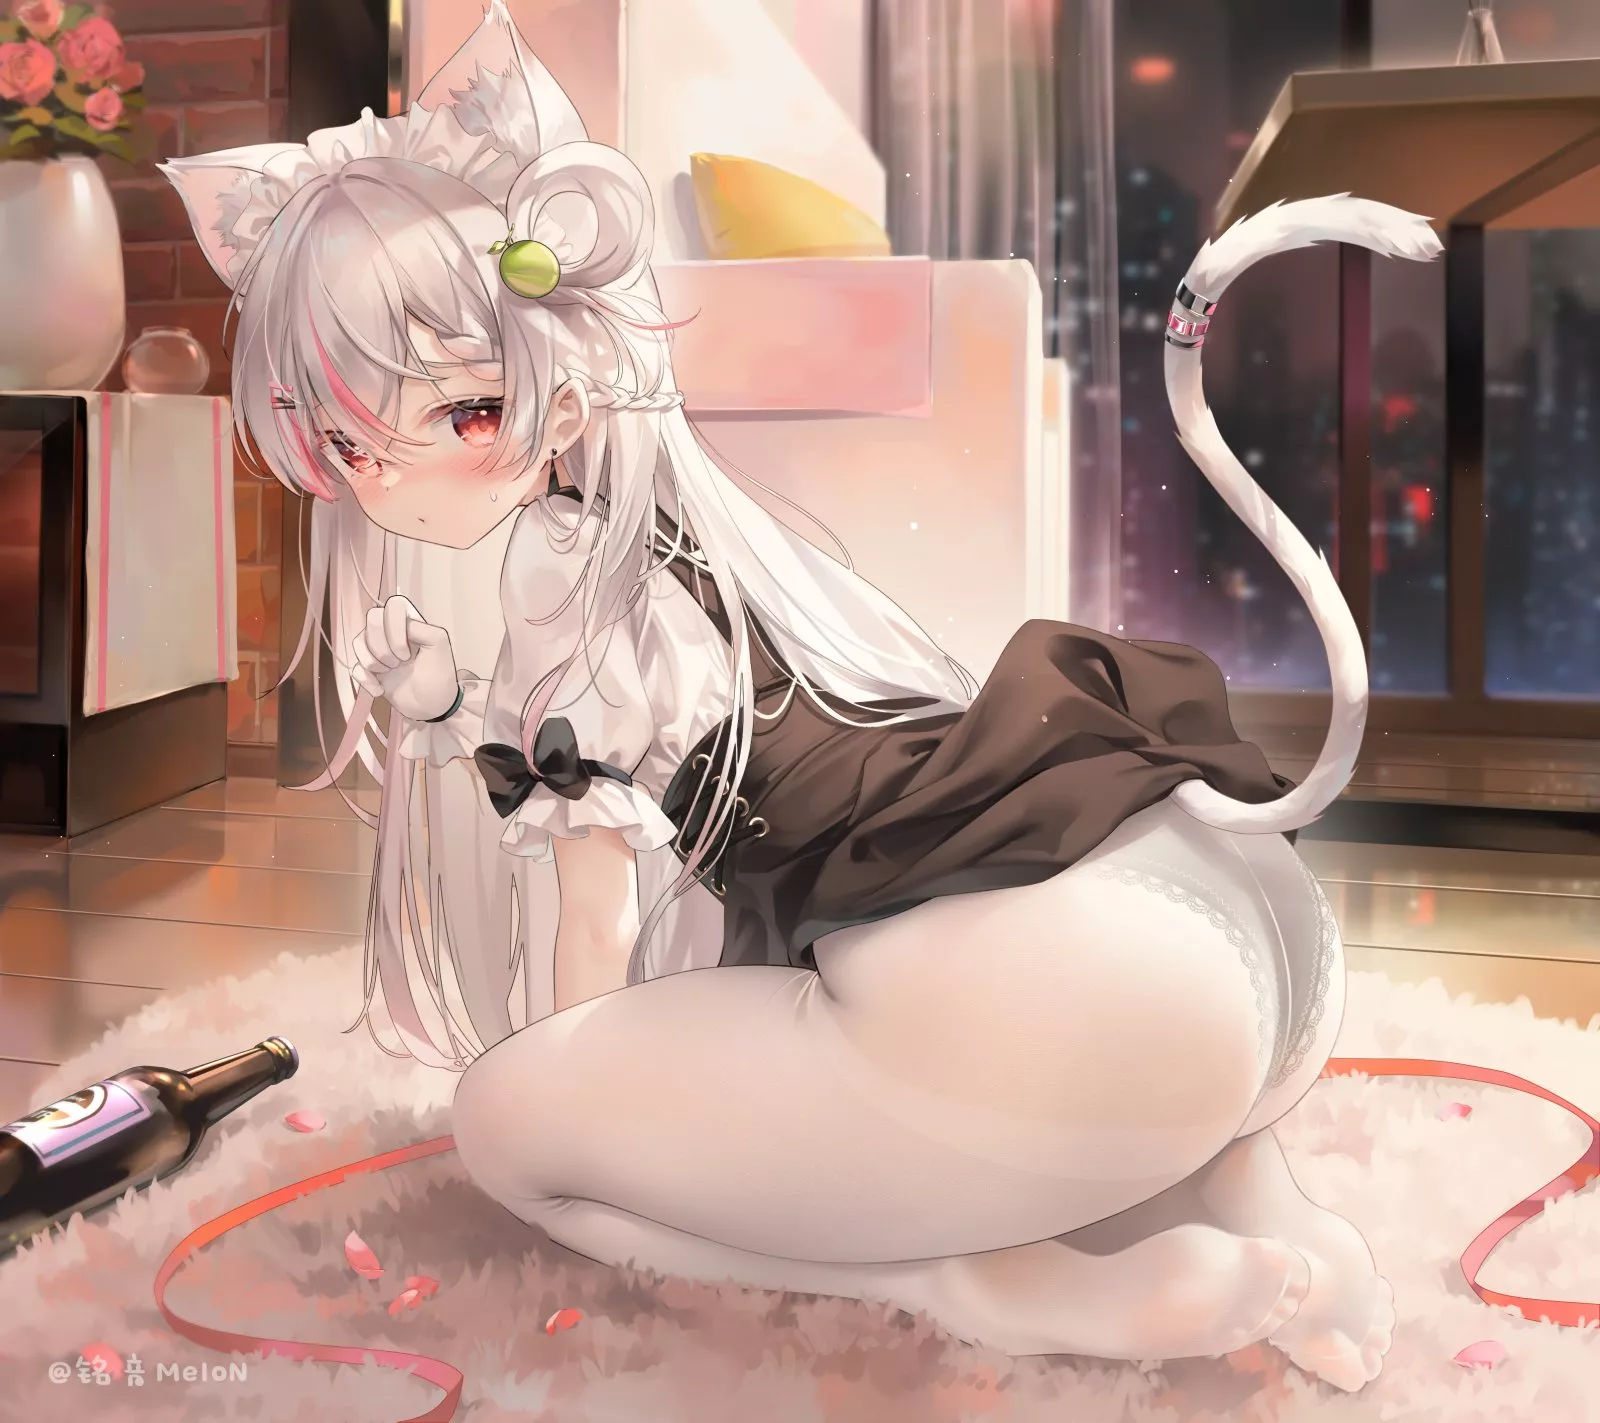 1600px x 1423px - Cute Neko maid with nice thighs & a bubble butt nudes by Henthigh_Senpai